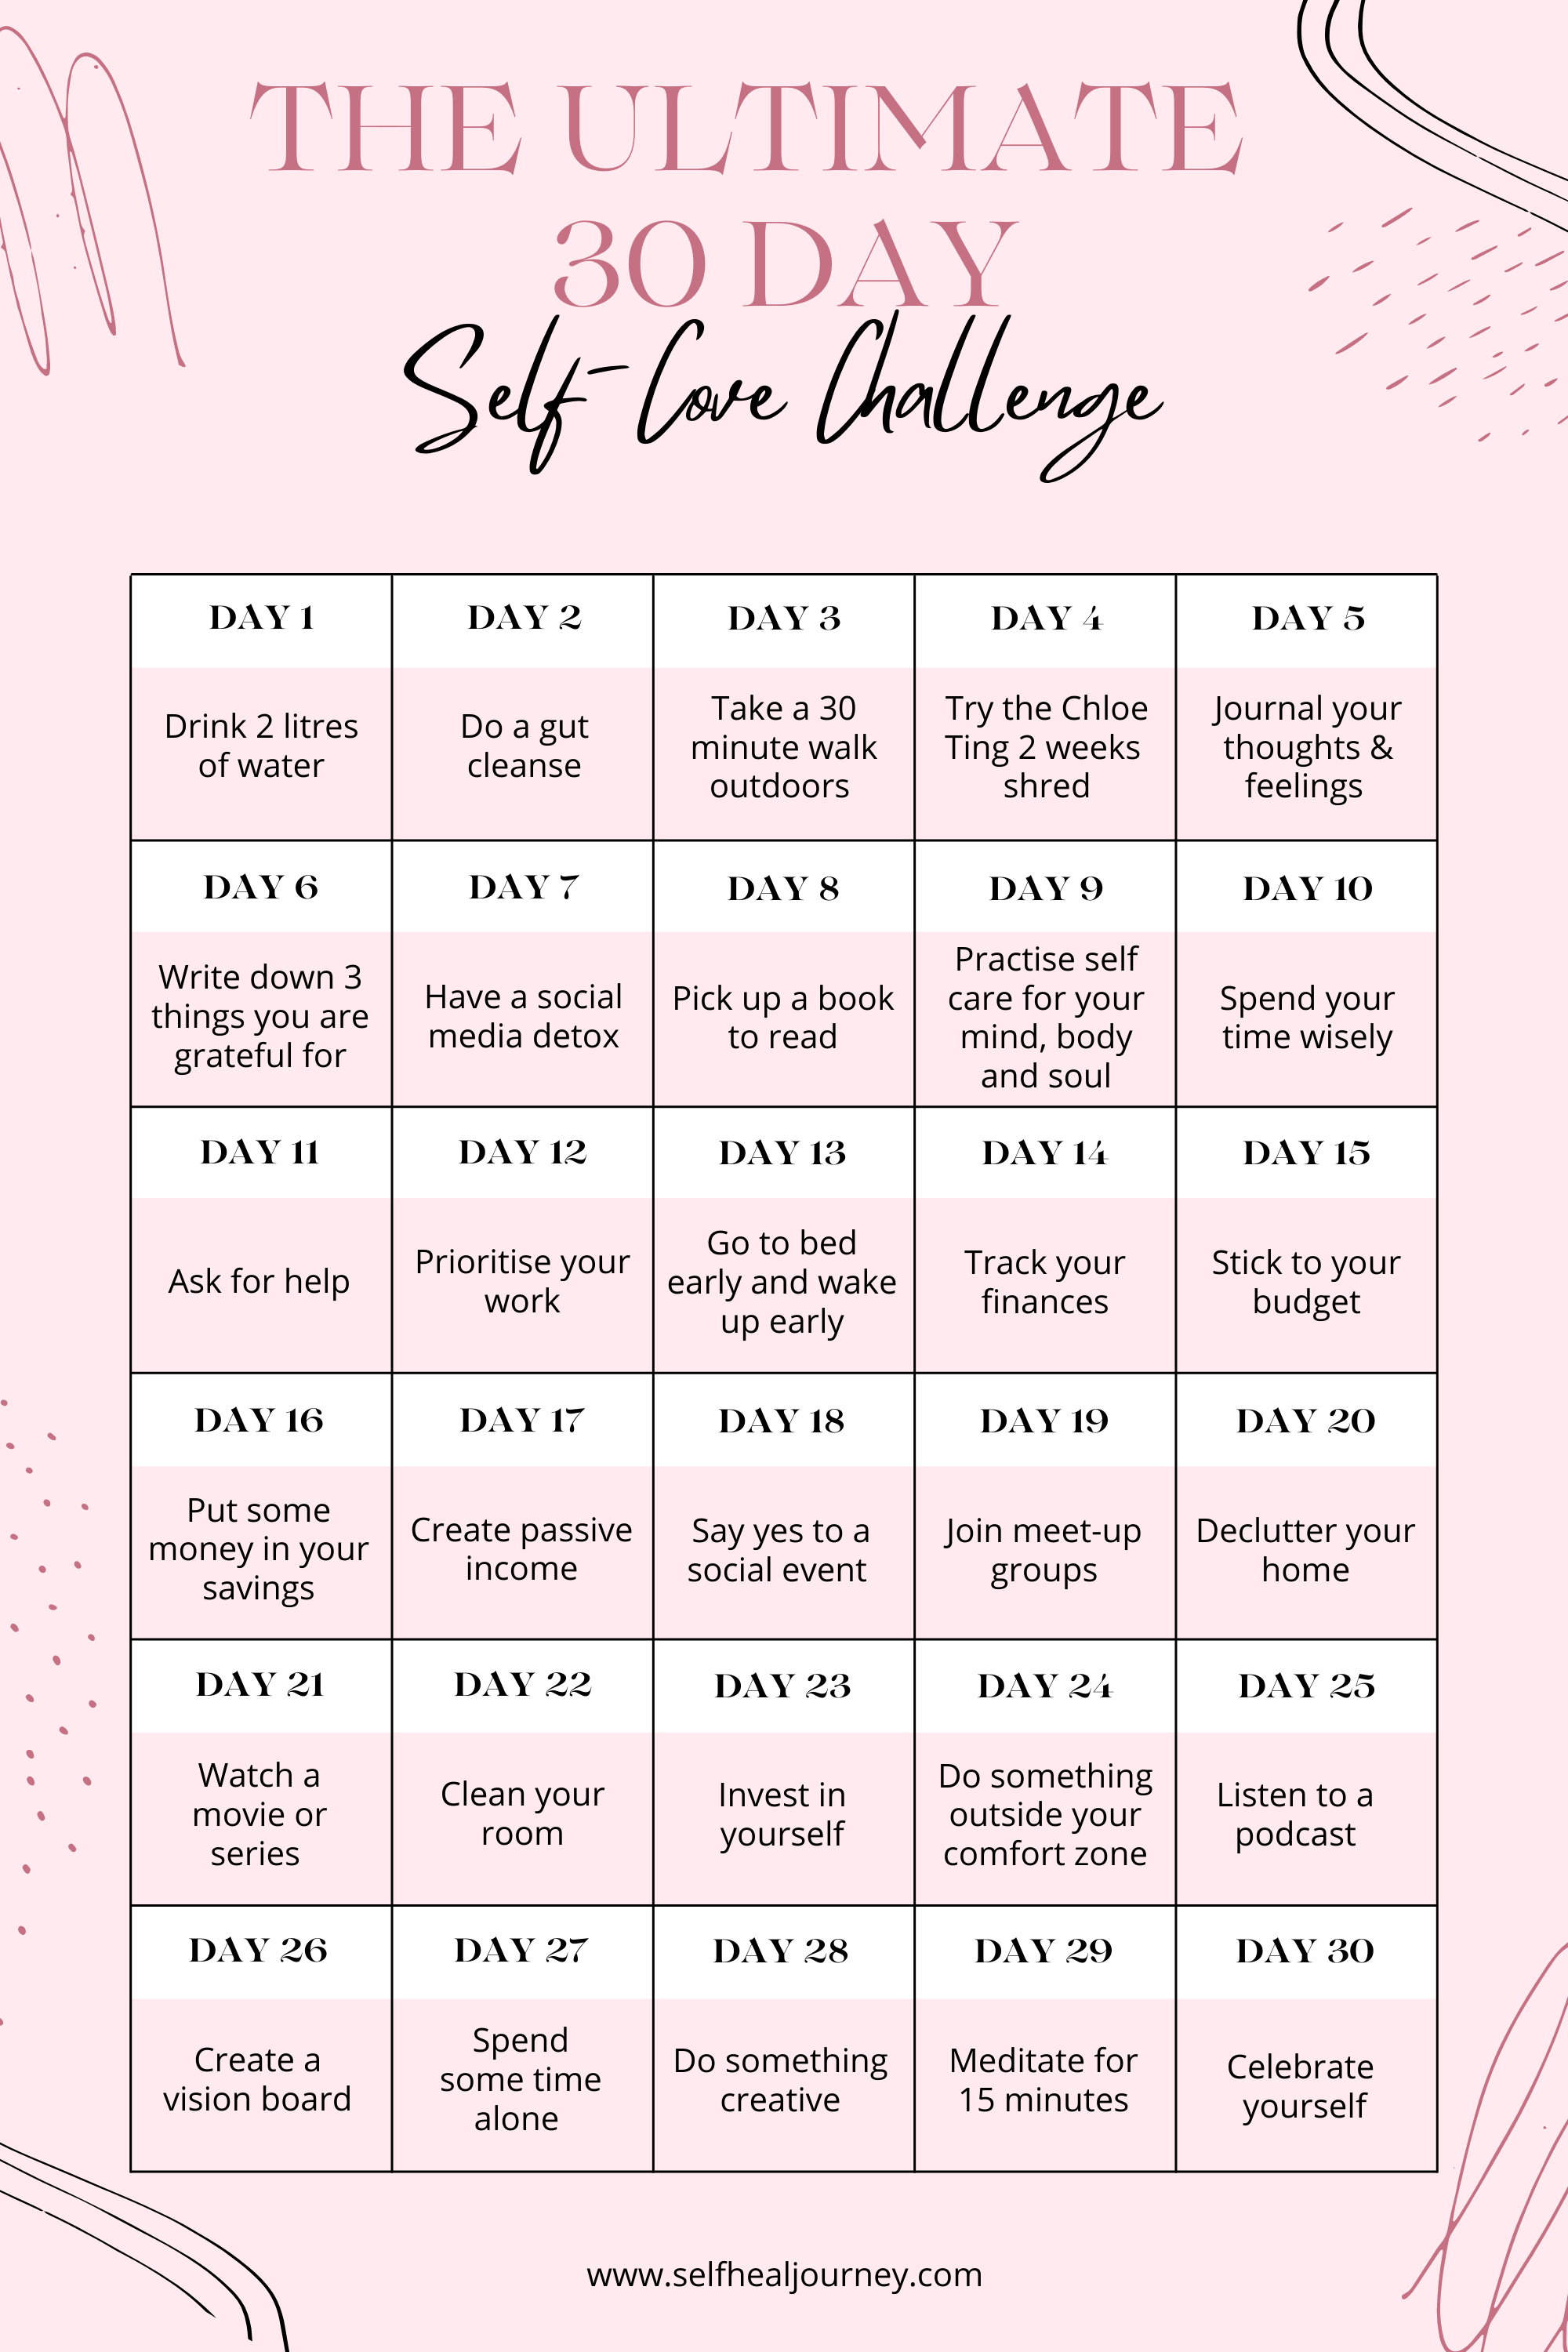 Self-Love Fitness Challenge Starts May 1st. Who ready? Who missed out